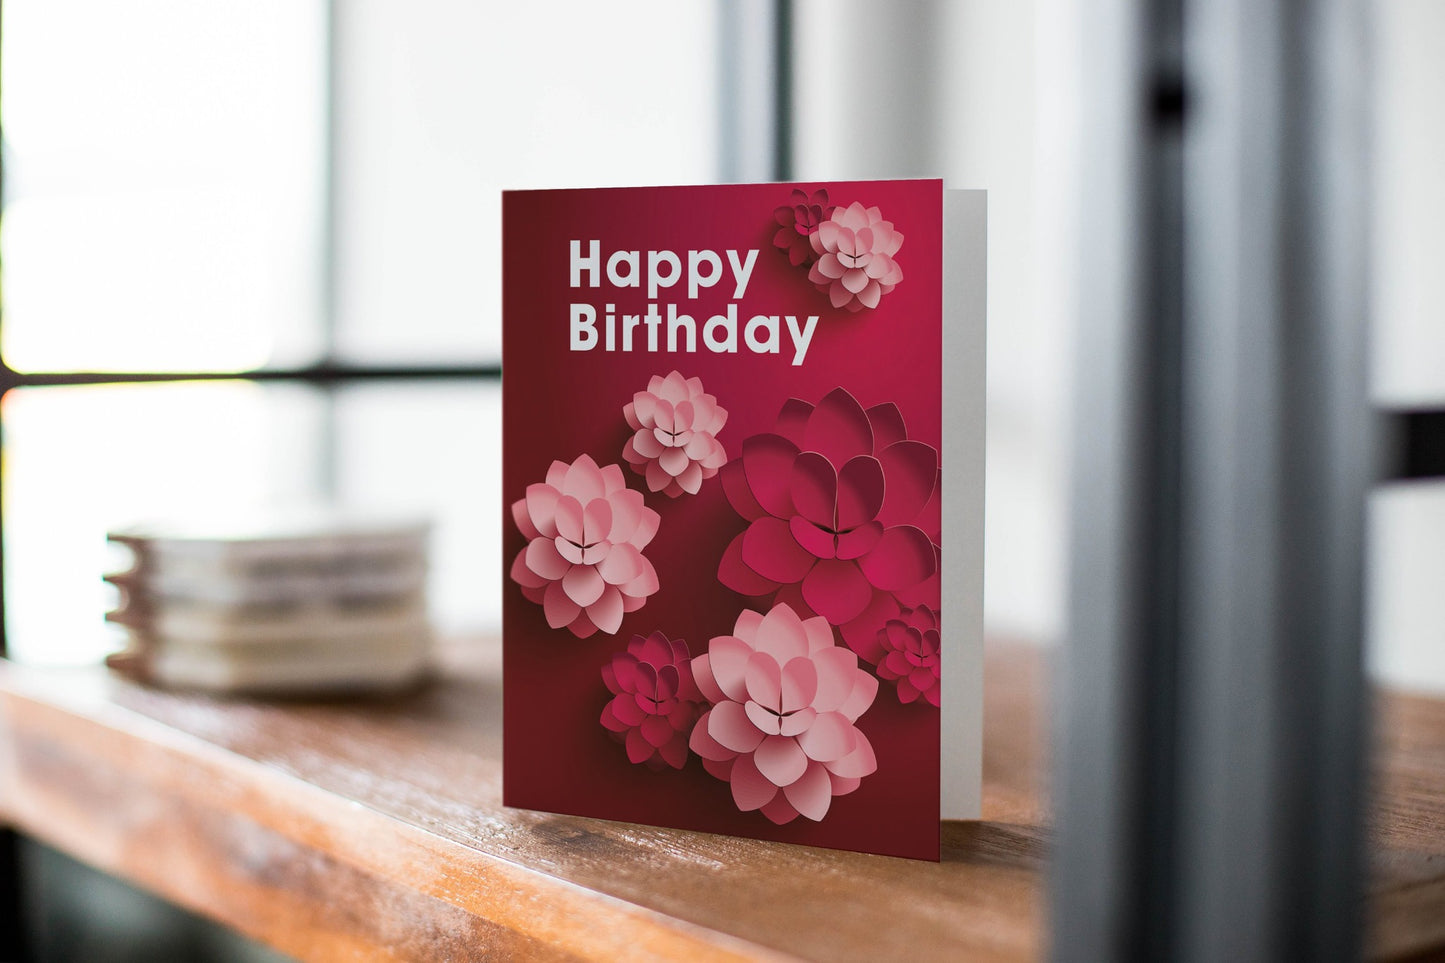 Floral Birthday Card For Everyone.